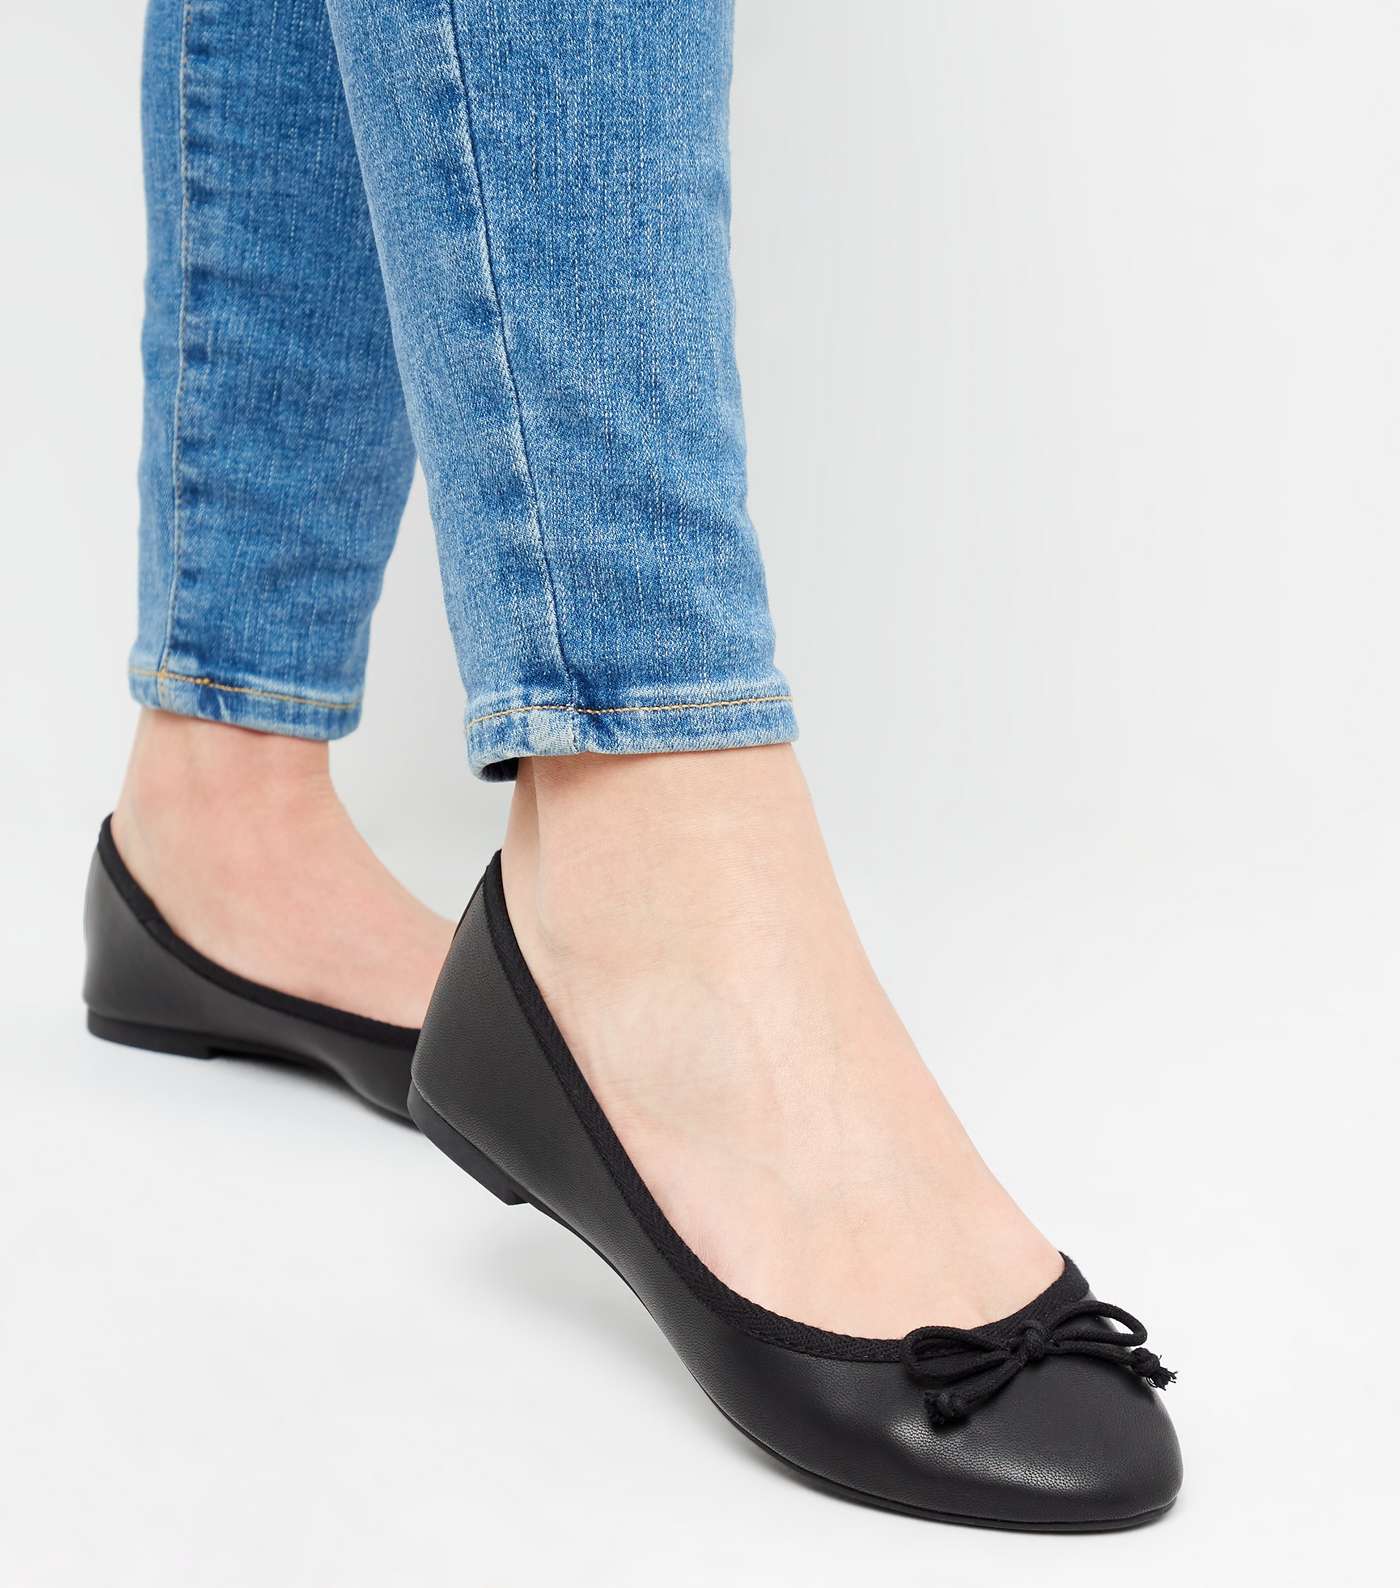 Black Leather-Look Check Lined Ballet Pumps Image 2